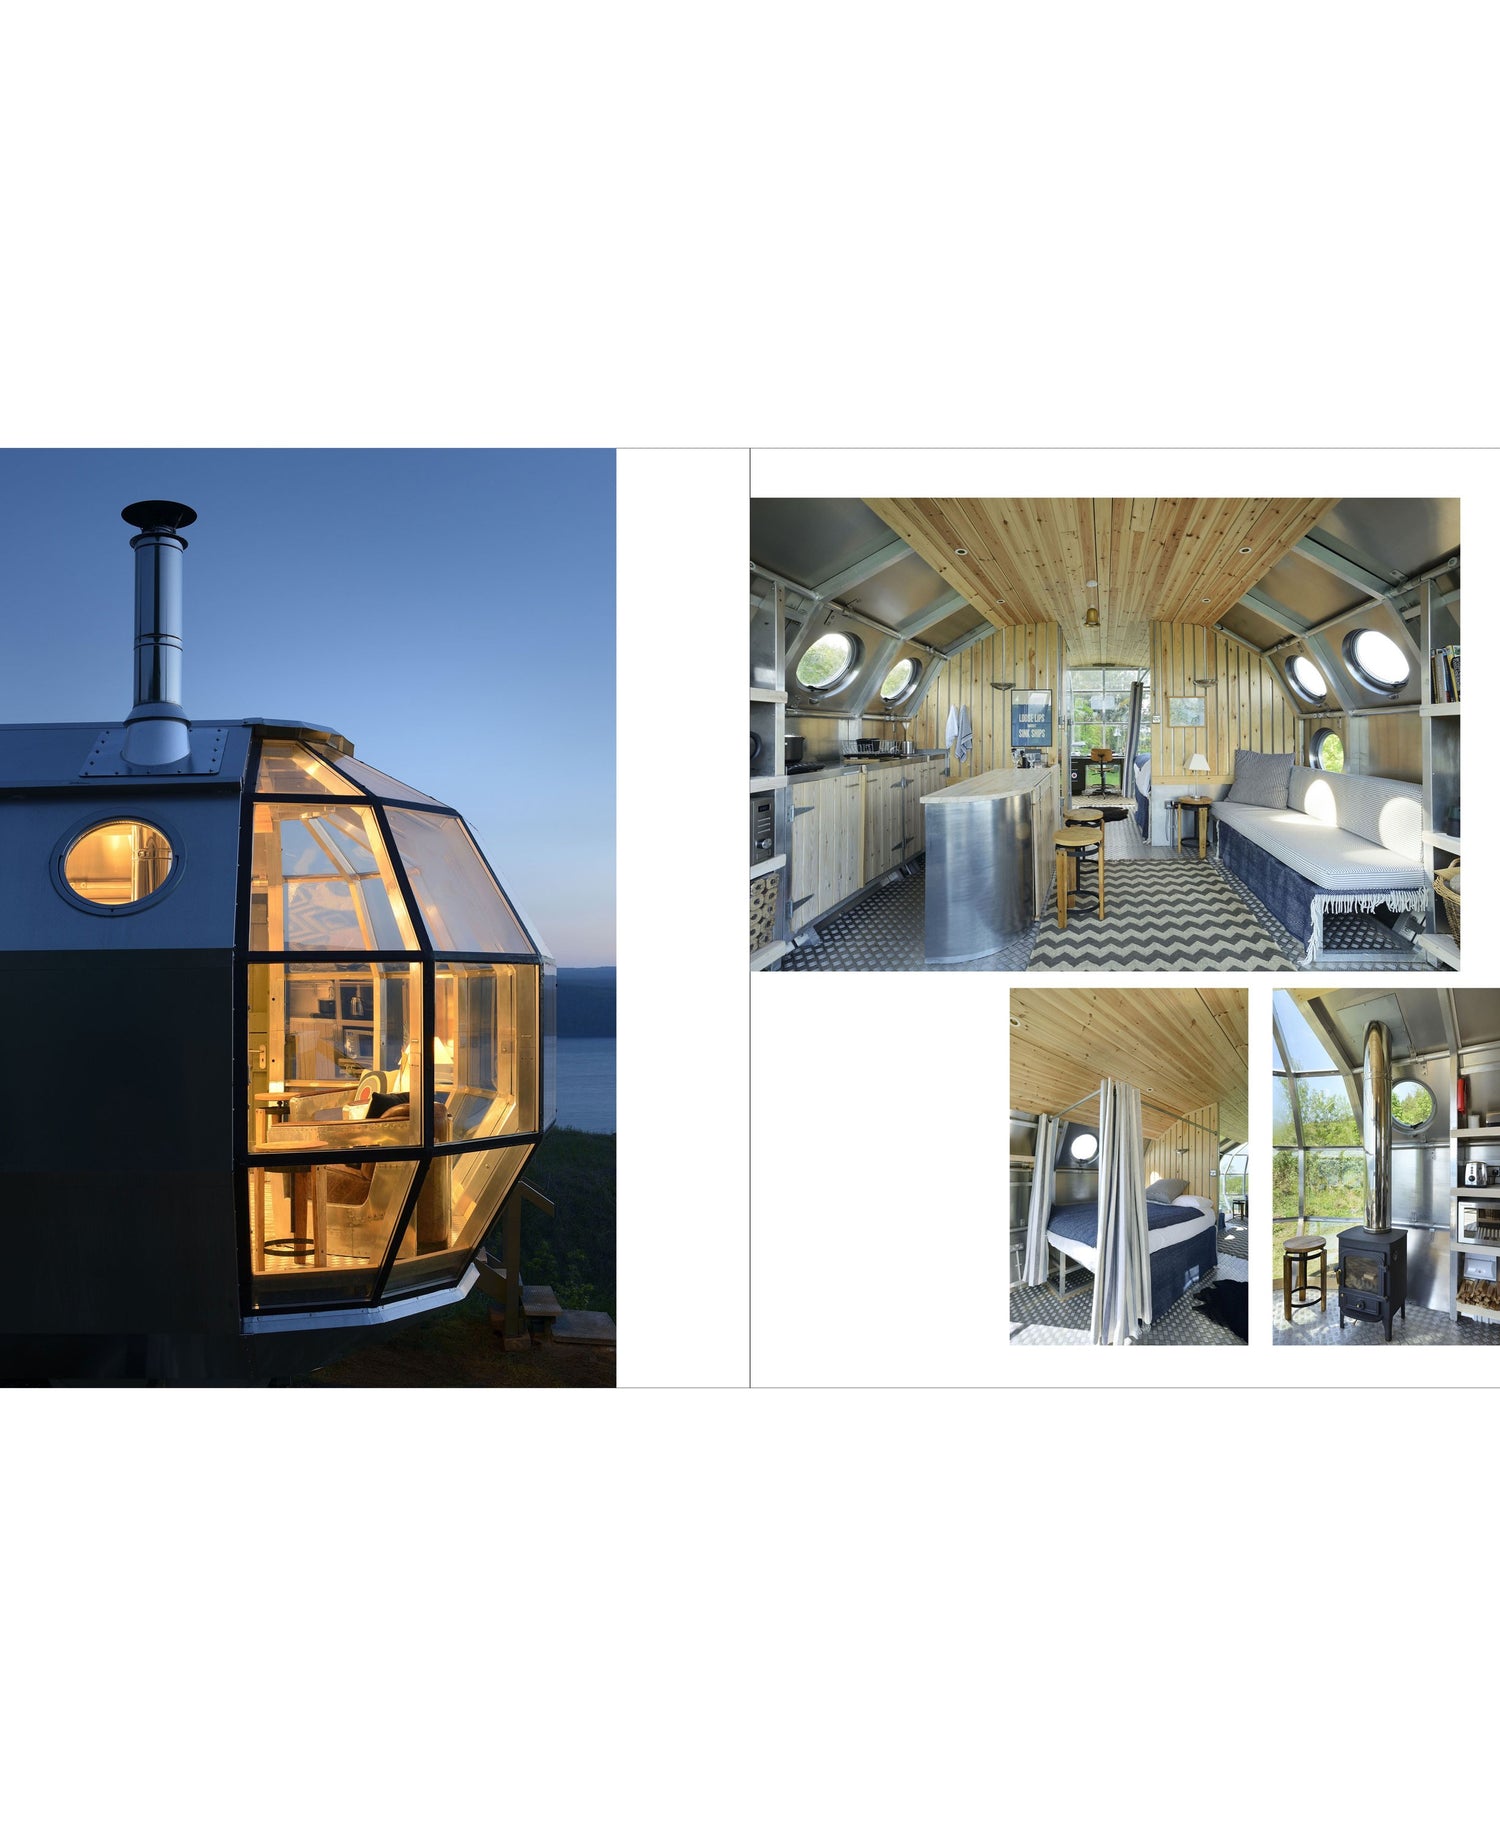 Escapology: Modern Cabins Cottages And Retreats